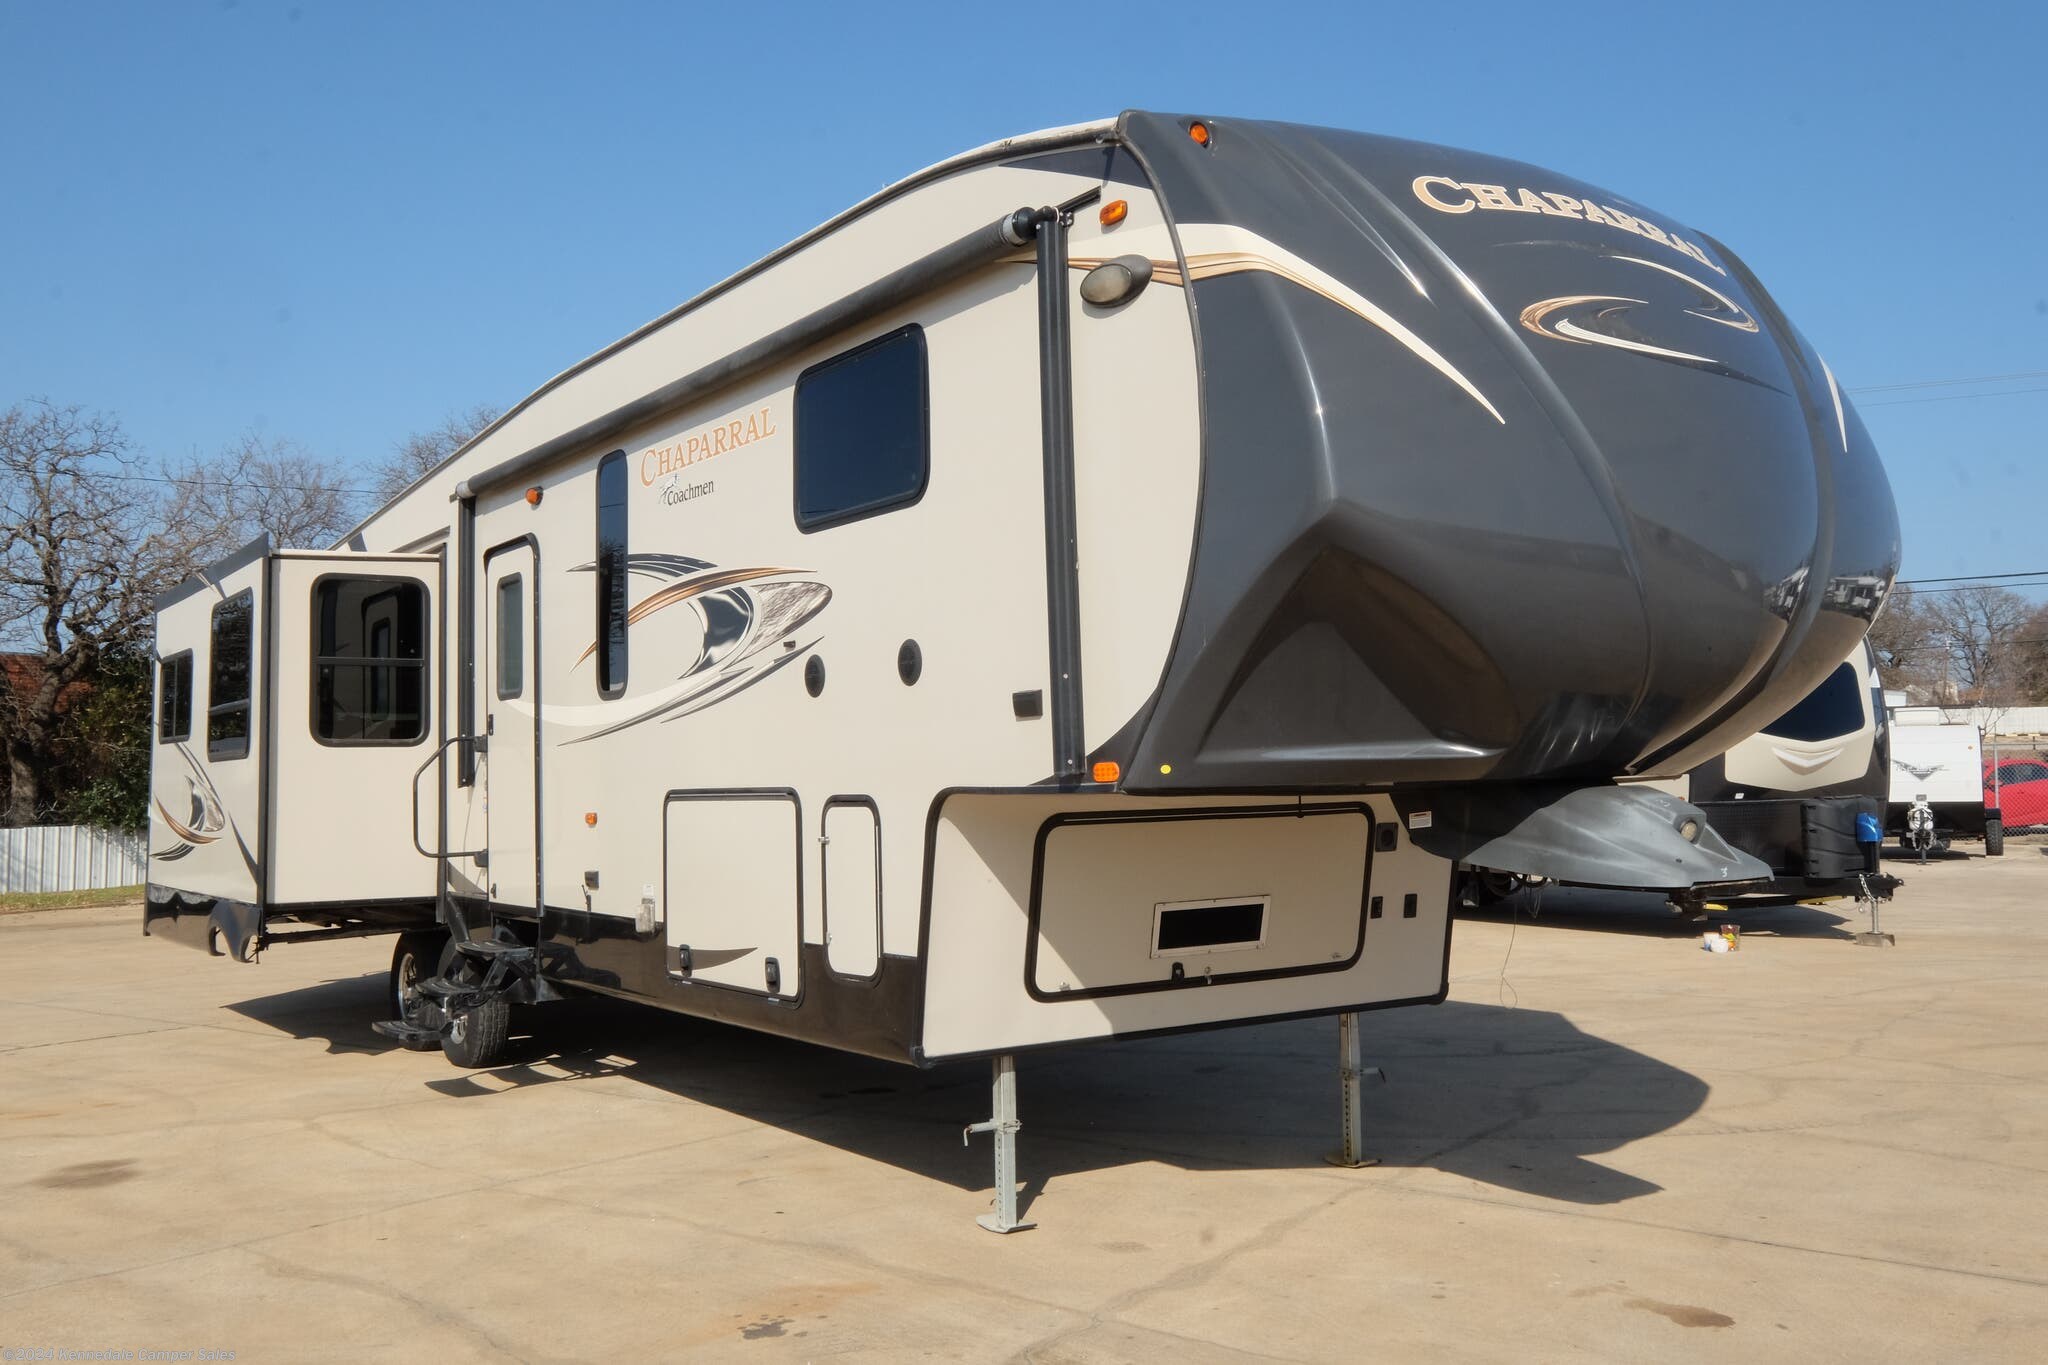 2015 Coachmen Chaparral 360IBL RV for Sale in Kennedale, TX 76060 ...